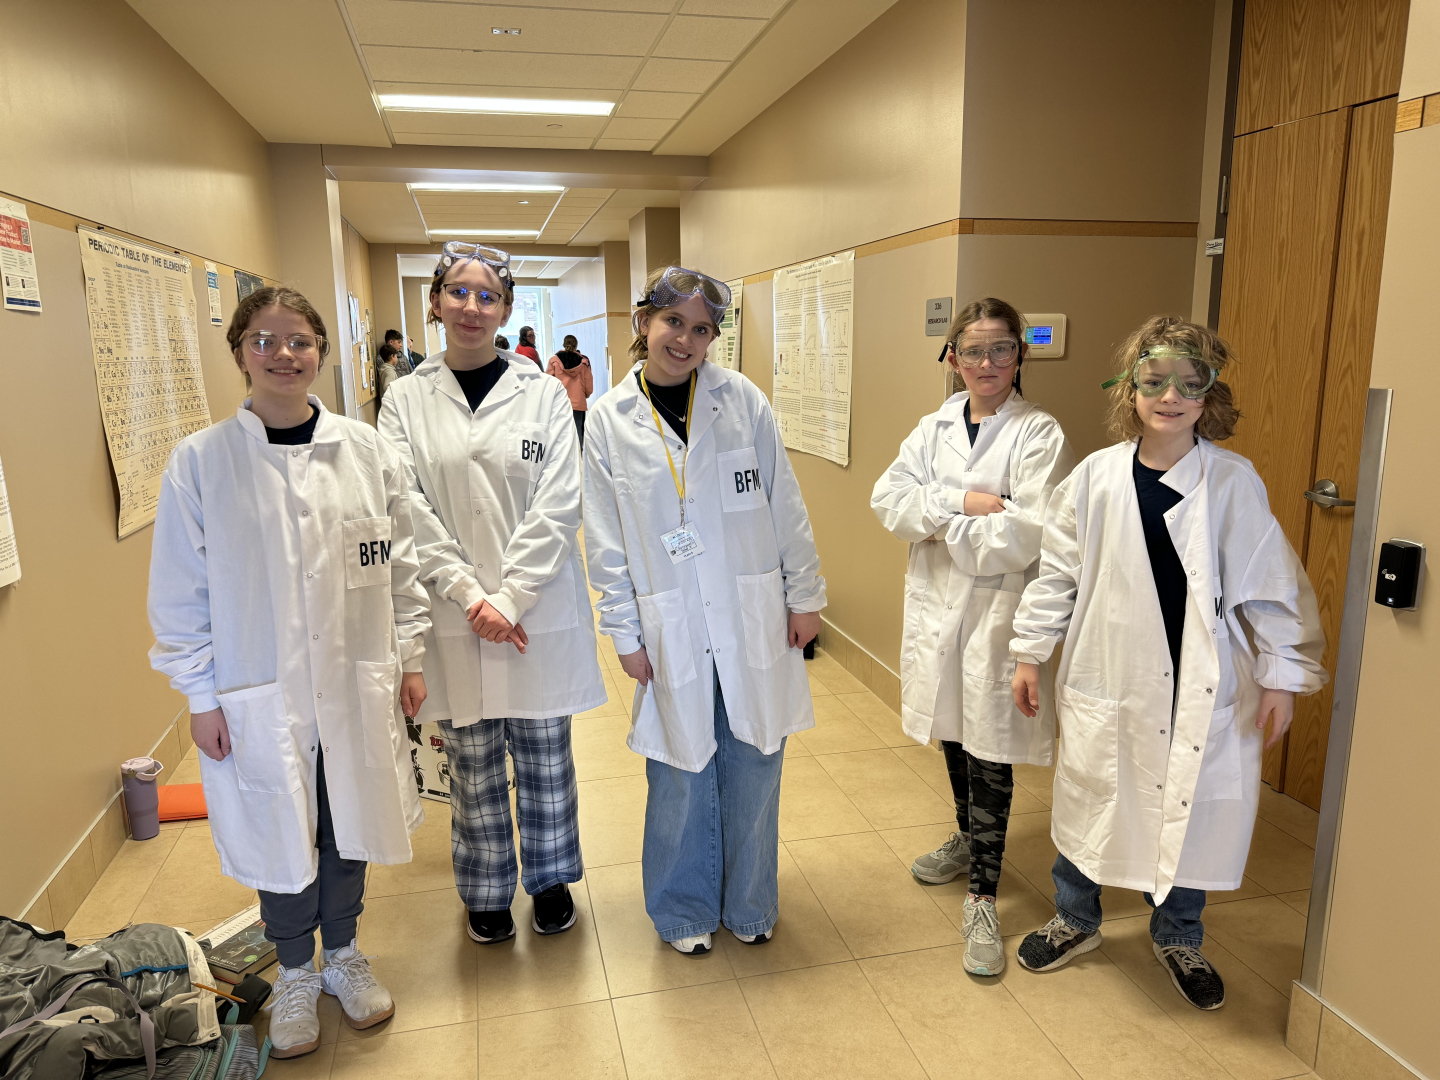 Regional Science Olympiad hosted by VCSU on March 28th